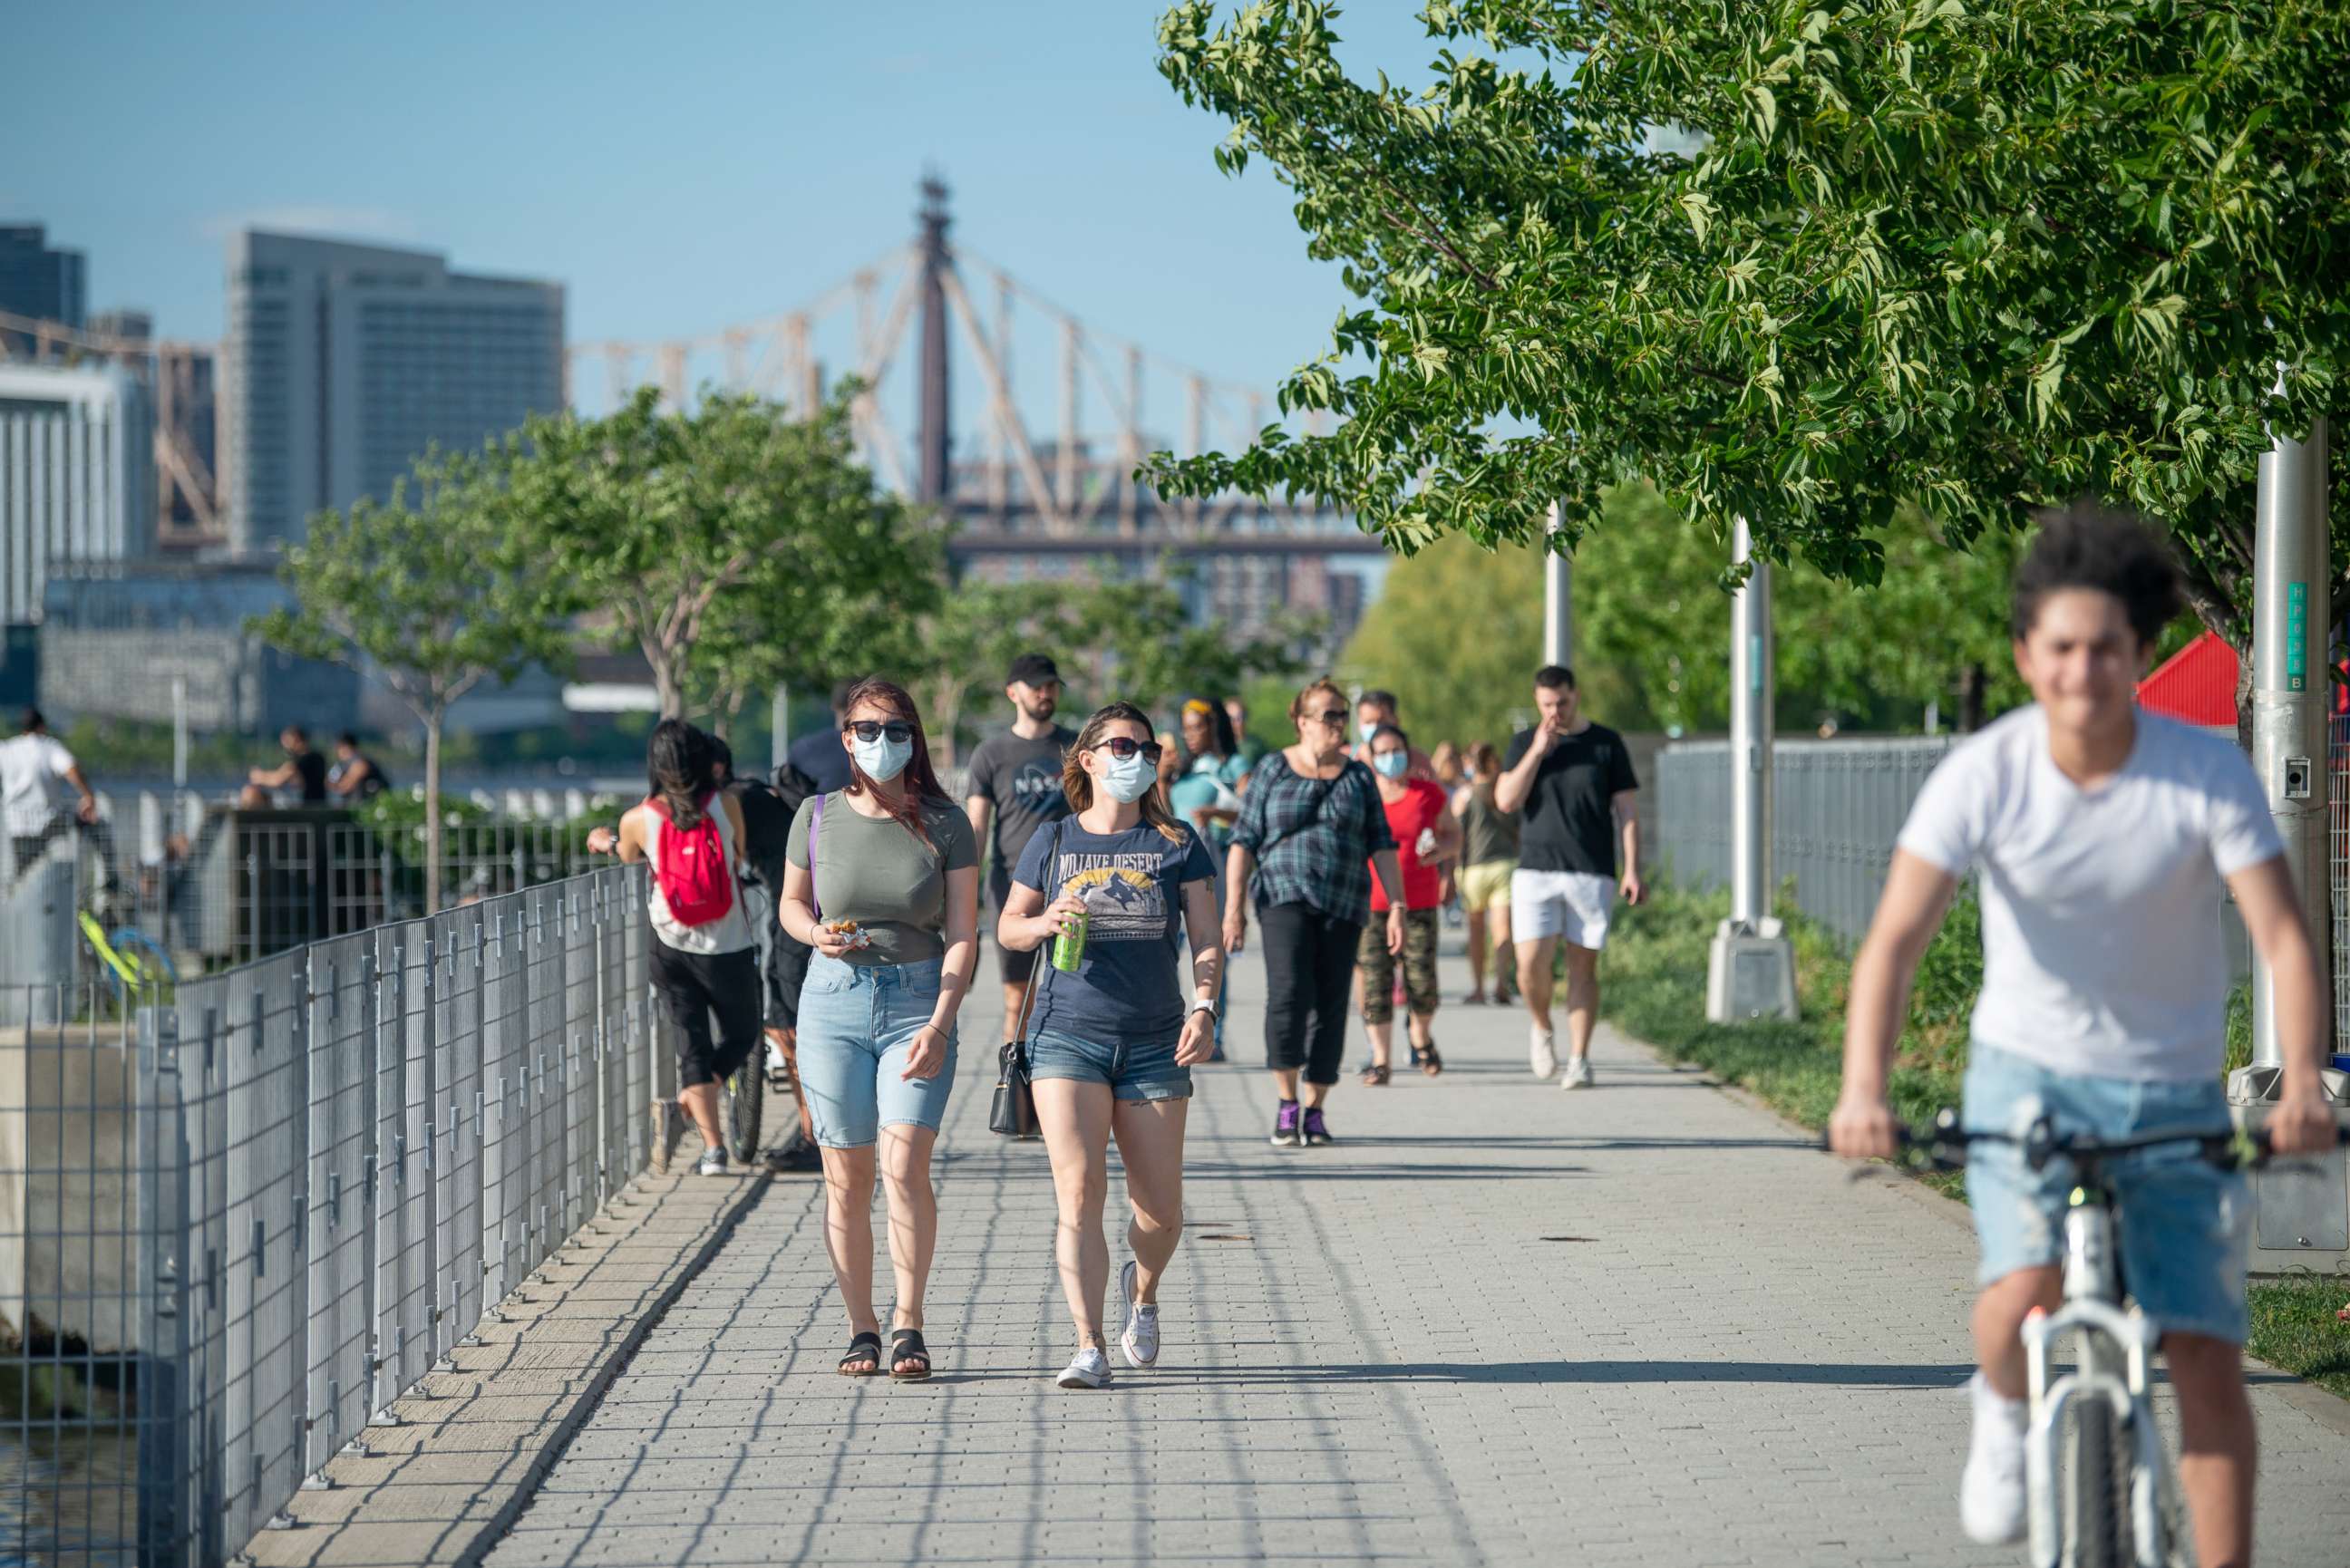 PHOTO: People wearing masks walk in Gantry Plaza State Park, Long Island City on May 30, 2020 in New York City.